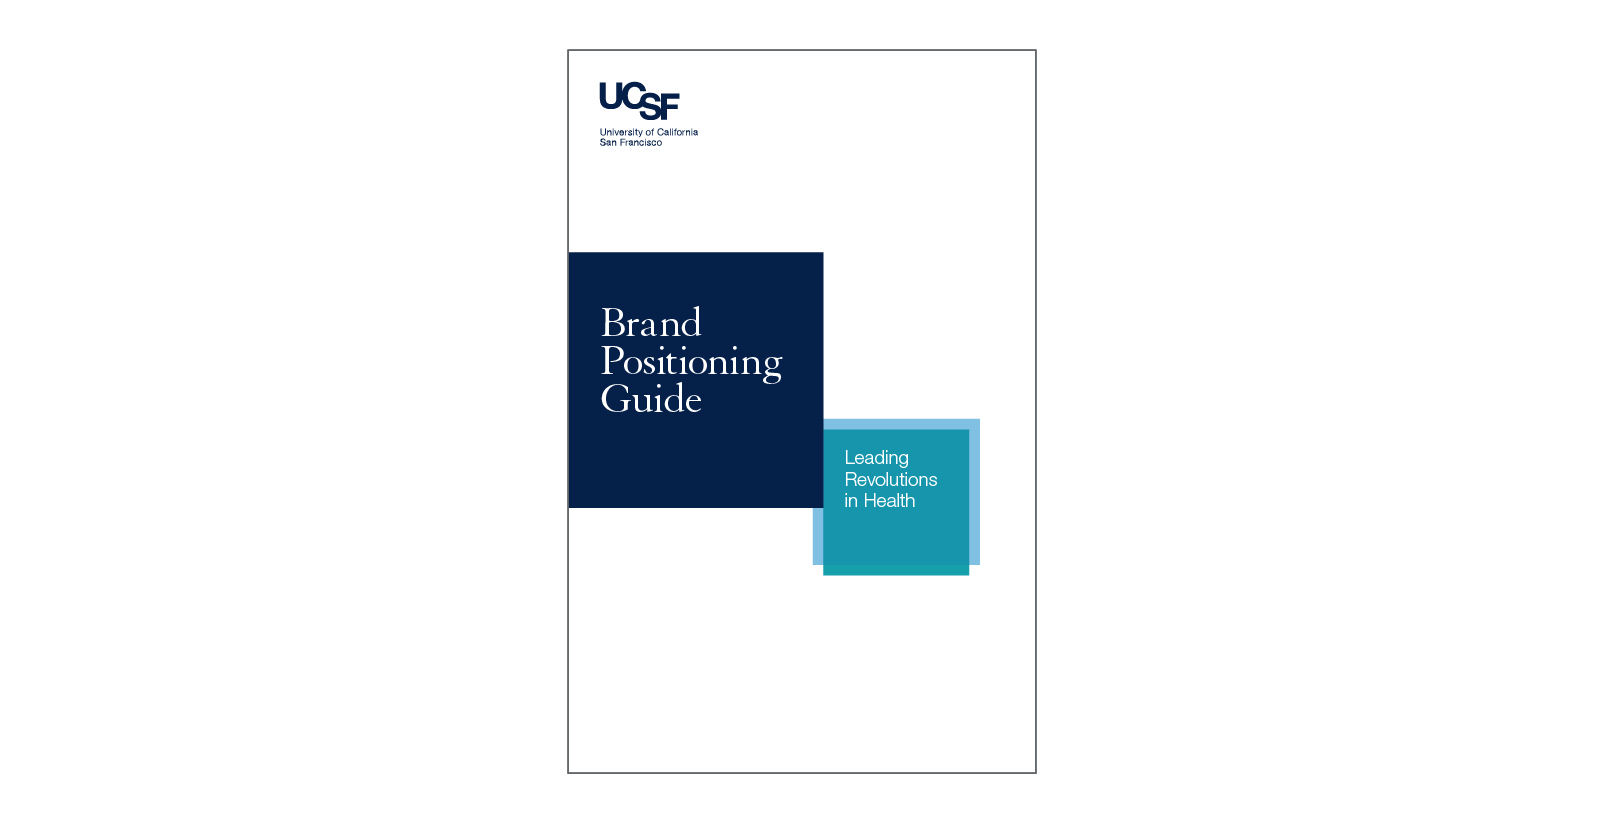 UCSF Brand Positioning Guide cover